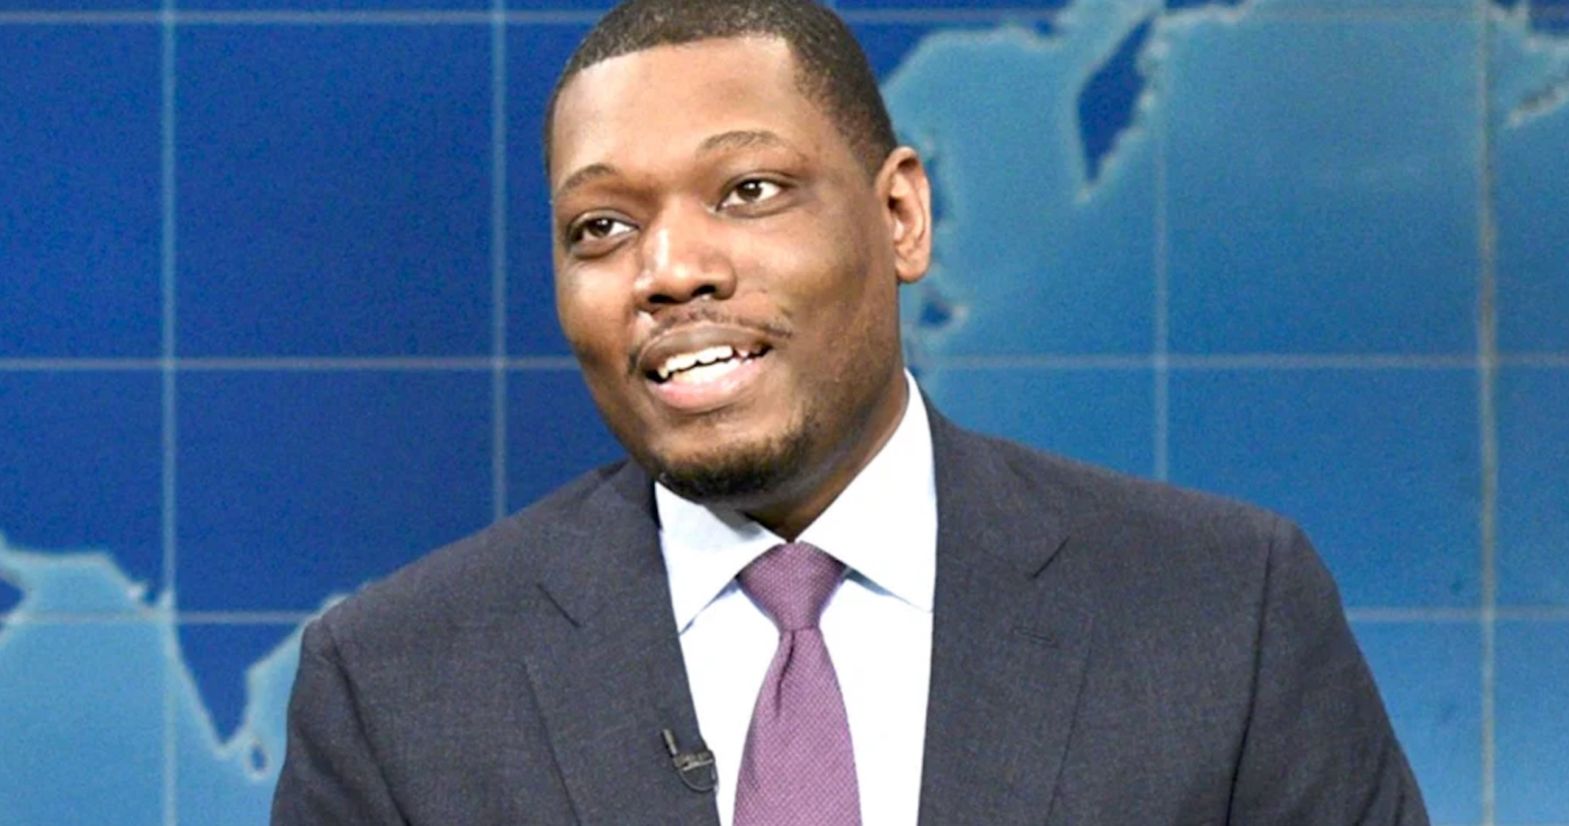 SNL Star Michael Che Faces Backlash After Sharing Offensive Simone Biles Jokes